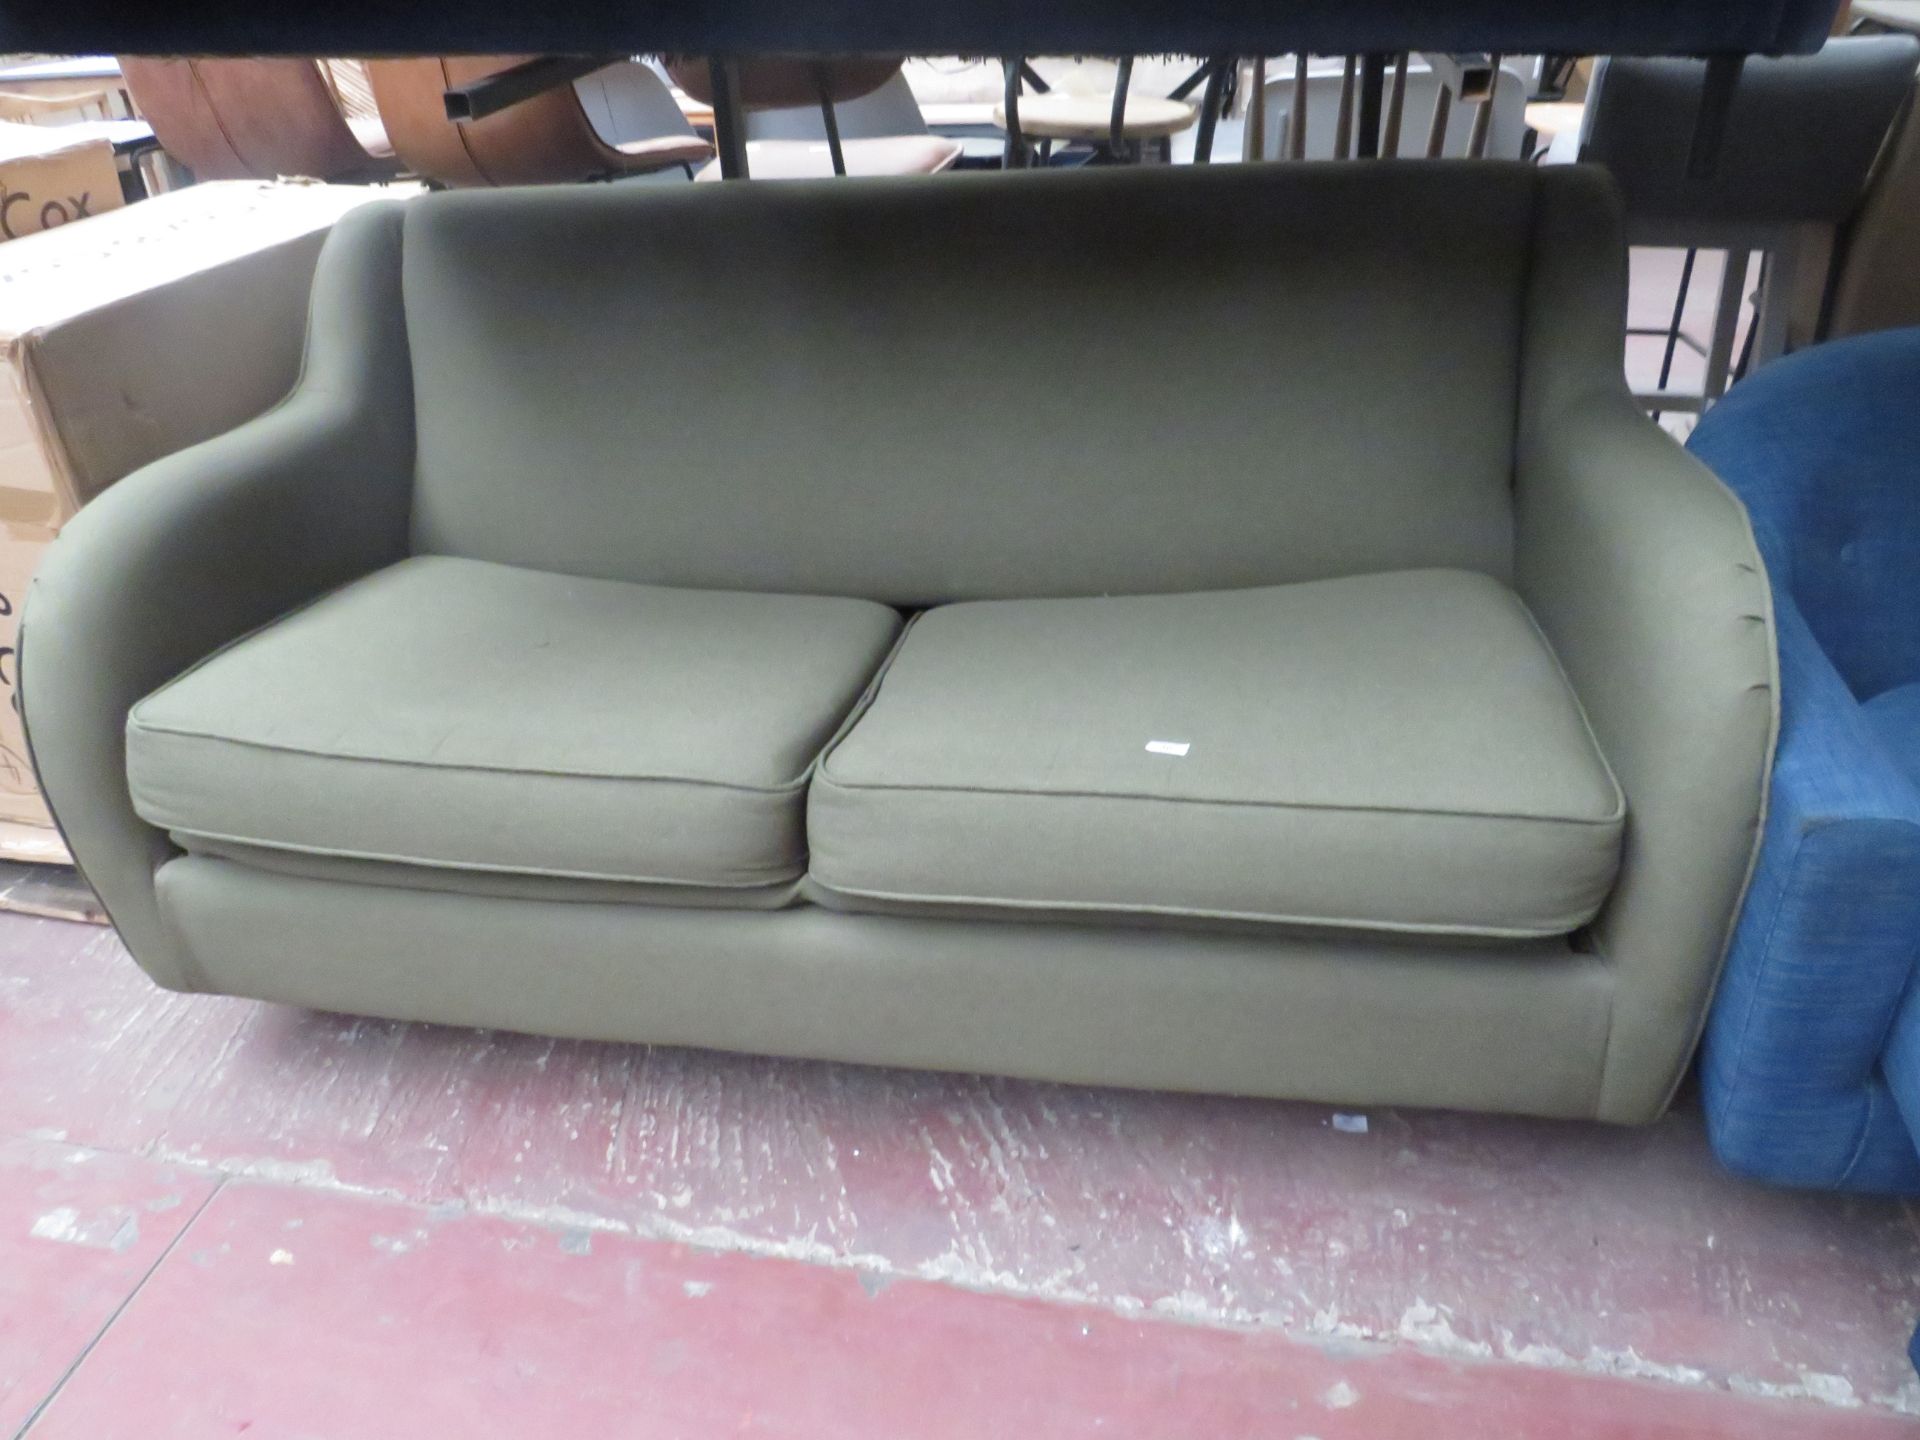 | 1X | MADE.COM GREEN FABRIC 2 SEATER SOFA | HAS NO FEET AND SOFA BED PART IS UNCHECKED AND